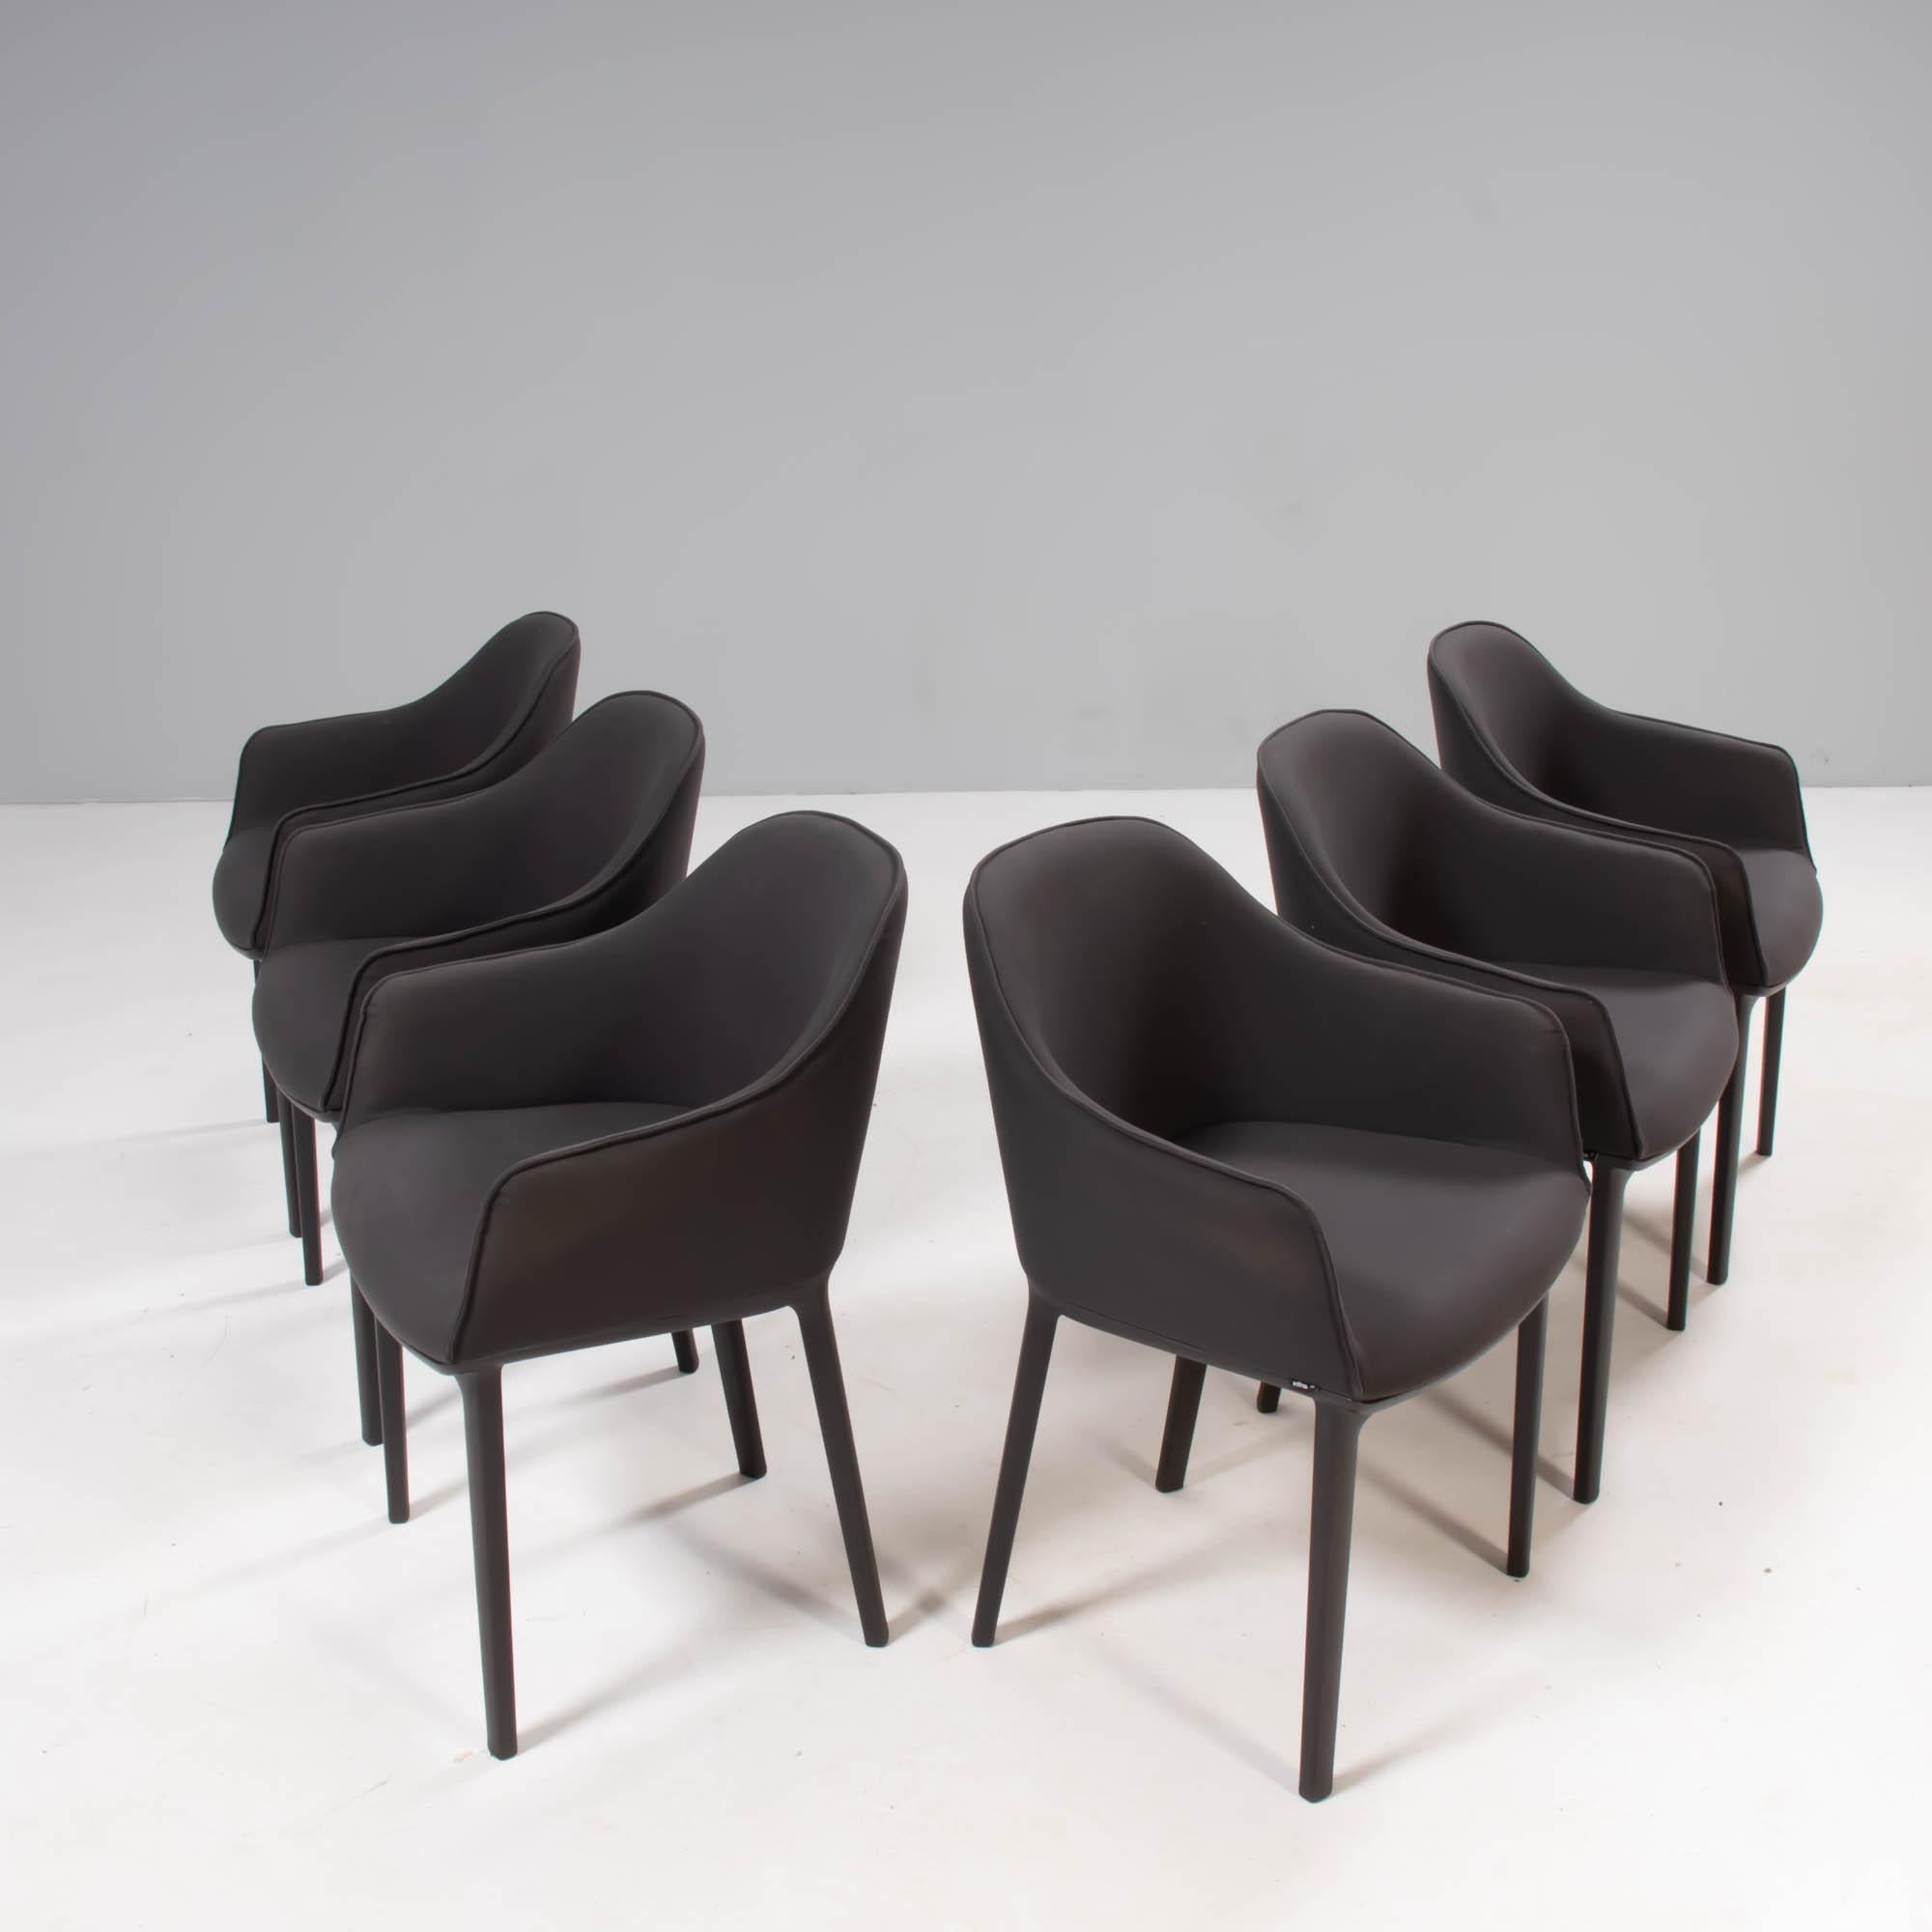 Originally designed by Ronan & Erwan Bouroullec for Vitra in 2008, the Softshell chair offers exceptional comfort thanks to the internal construction.

Featuring vertical ribs concealed in the shell, the chair allows for movement and flexibility,